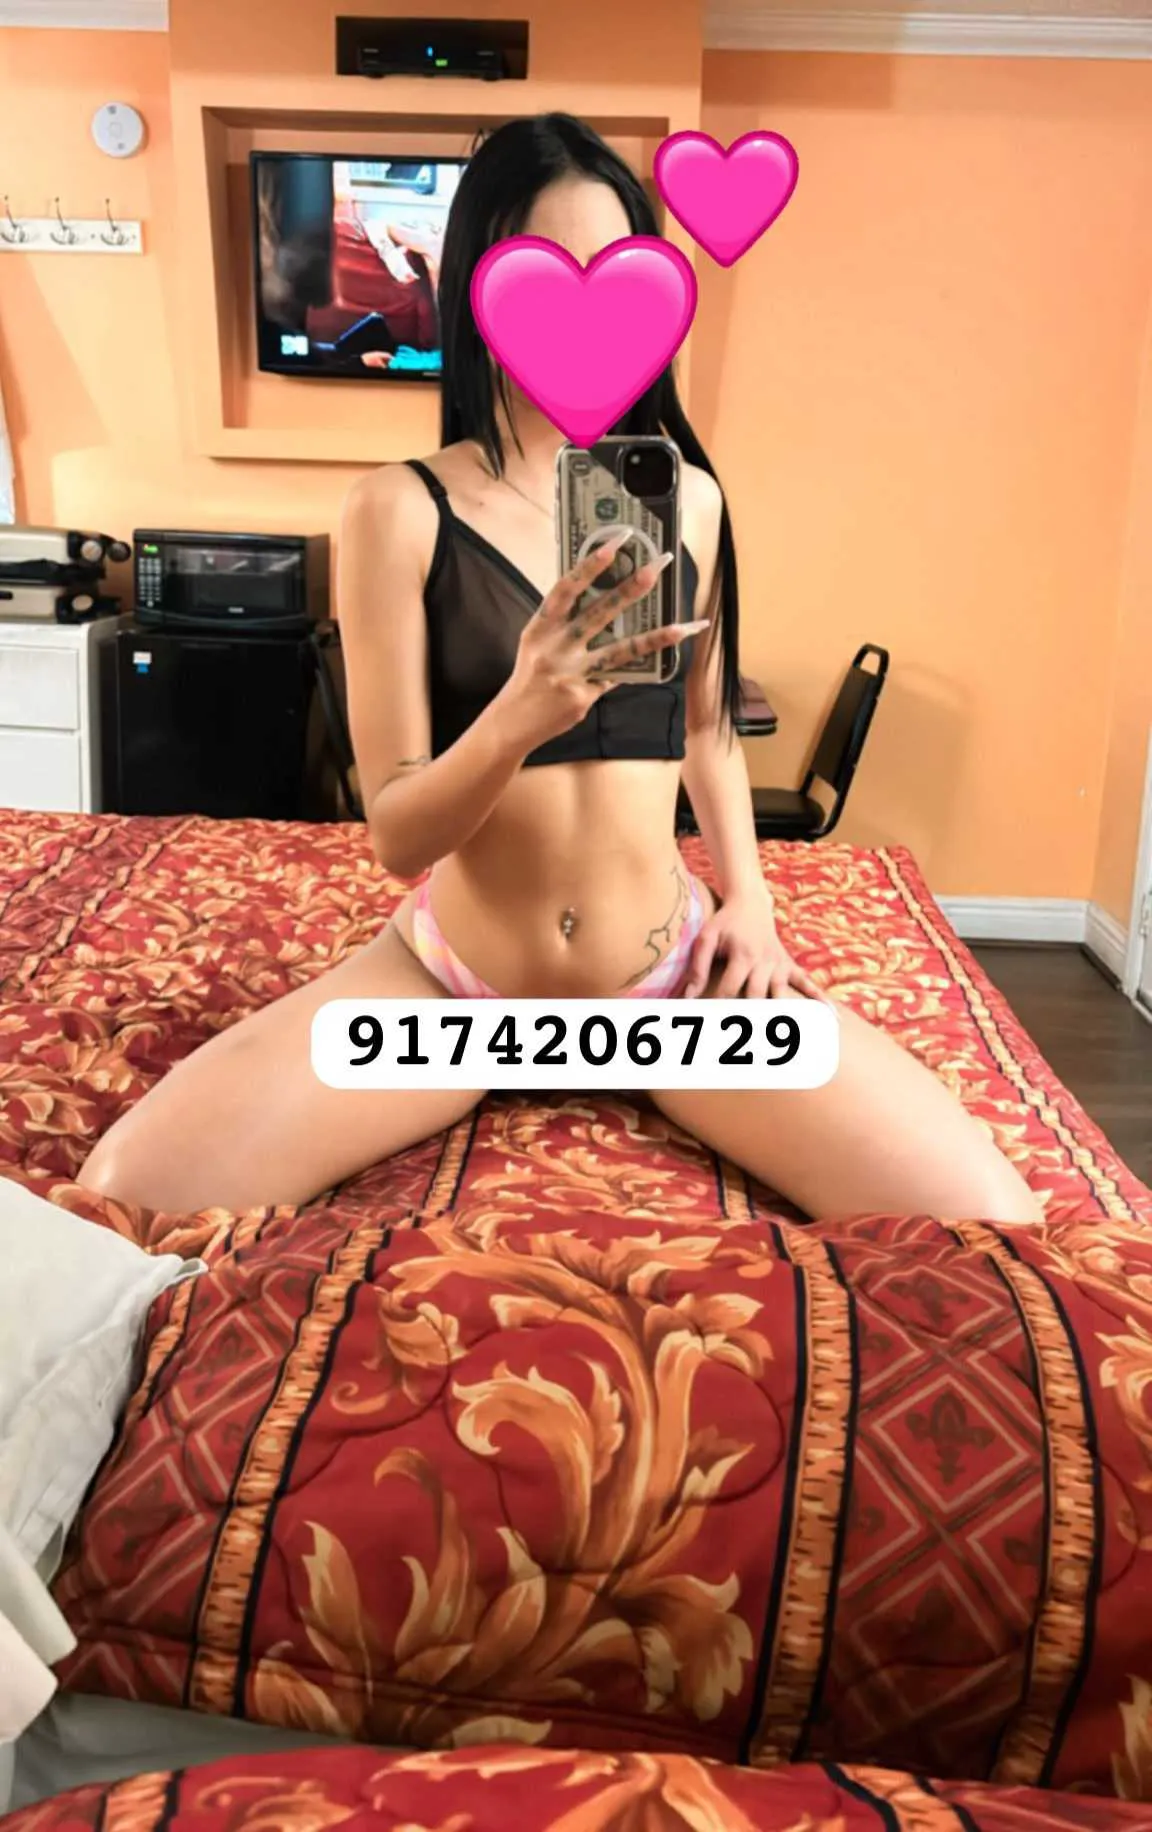 Reviews about escort with phone number 9174206729